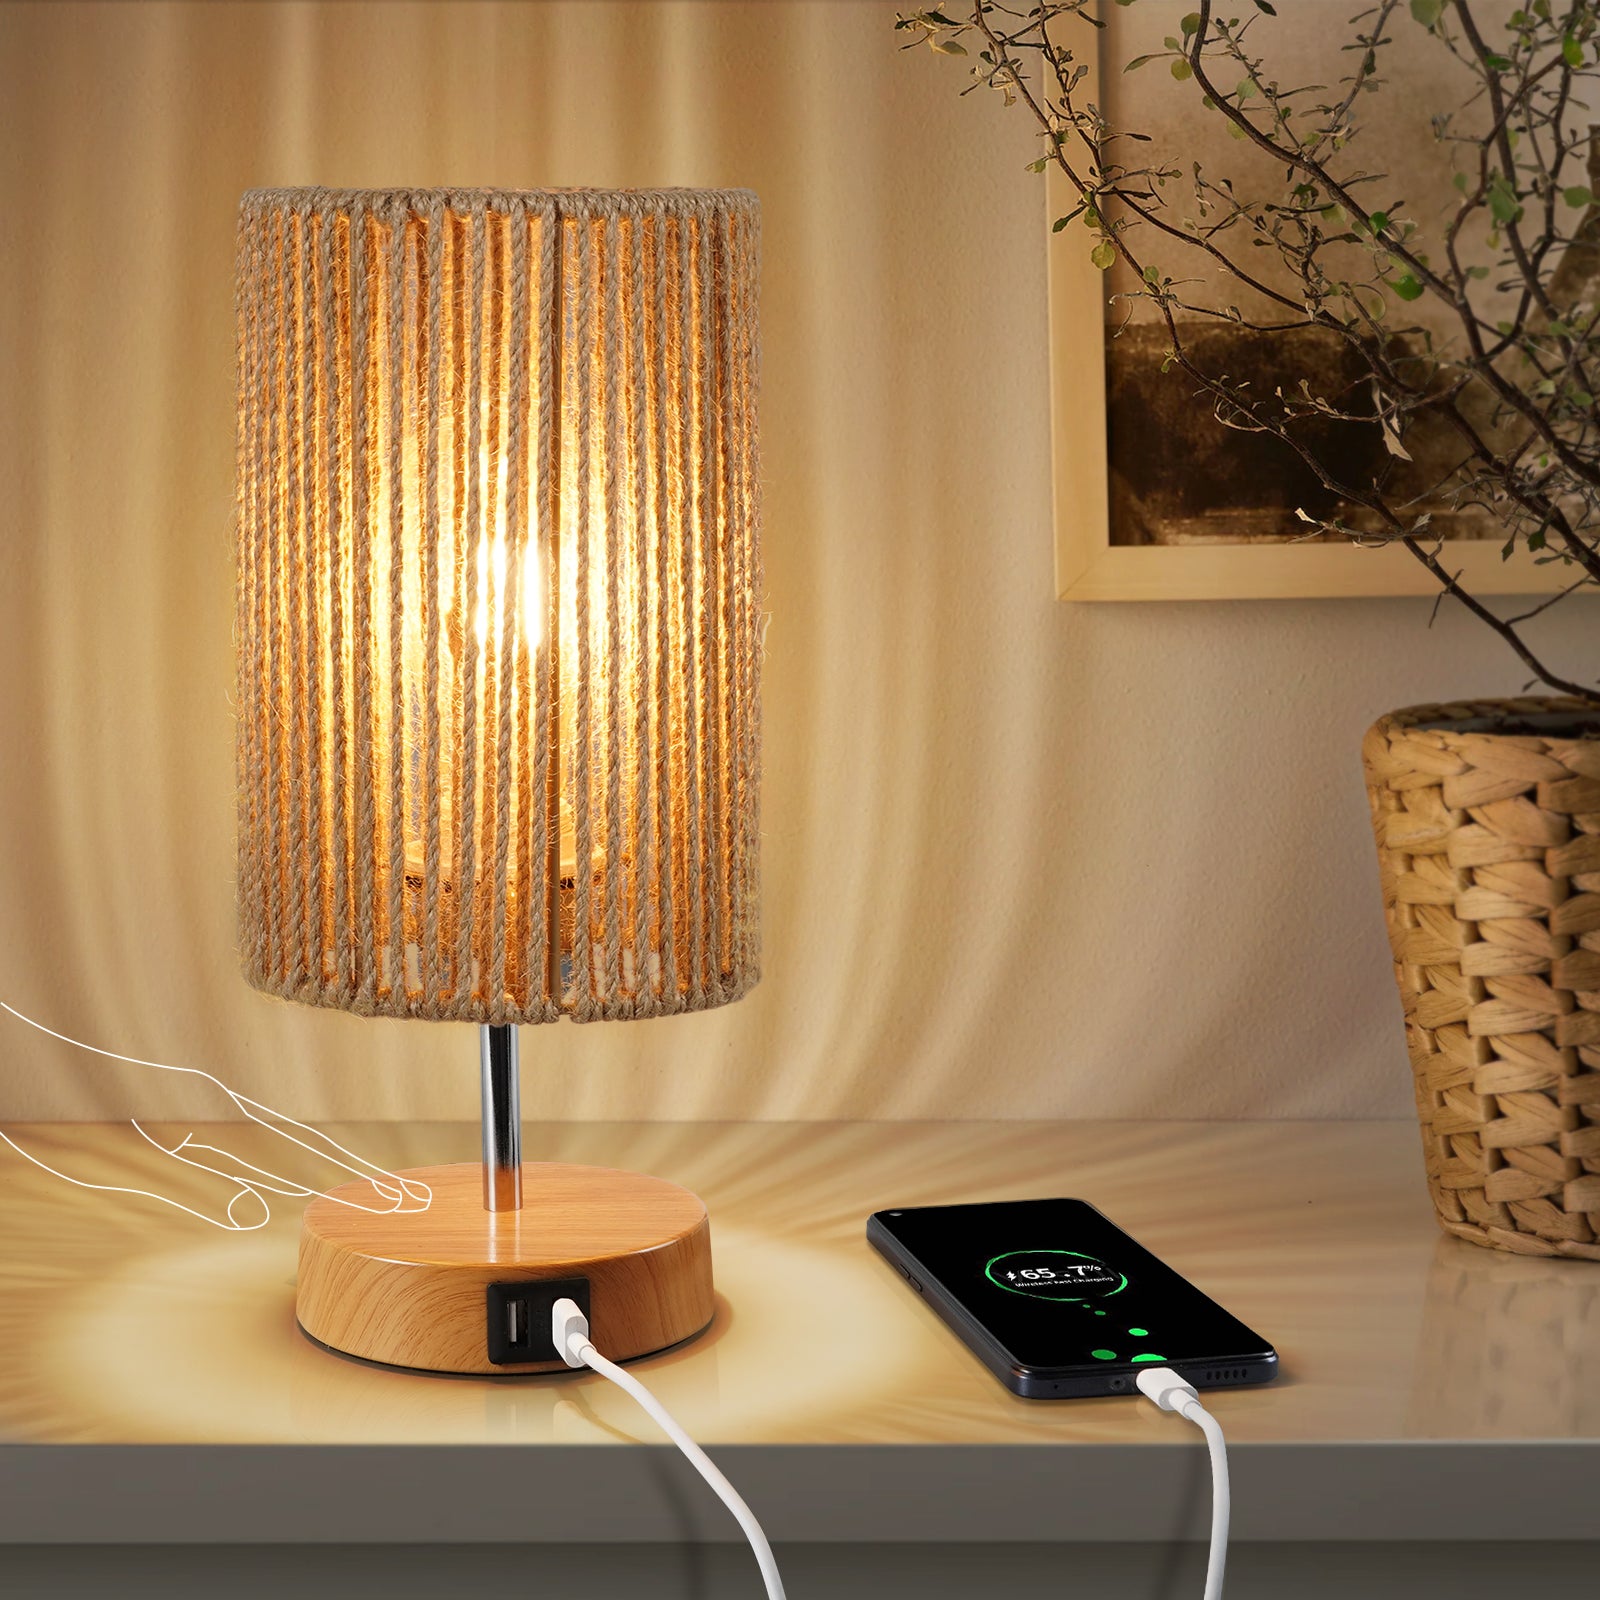 N08 Natural Hand-woven Table Lamp with USB Charging Port for Living Room